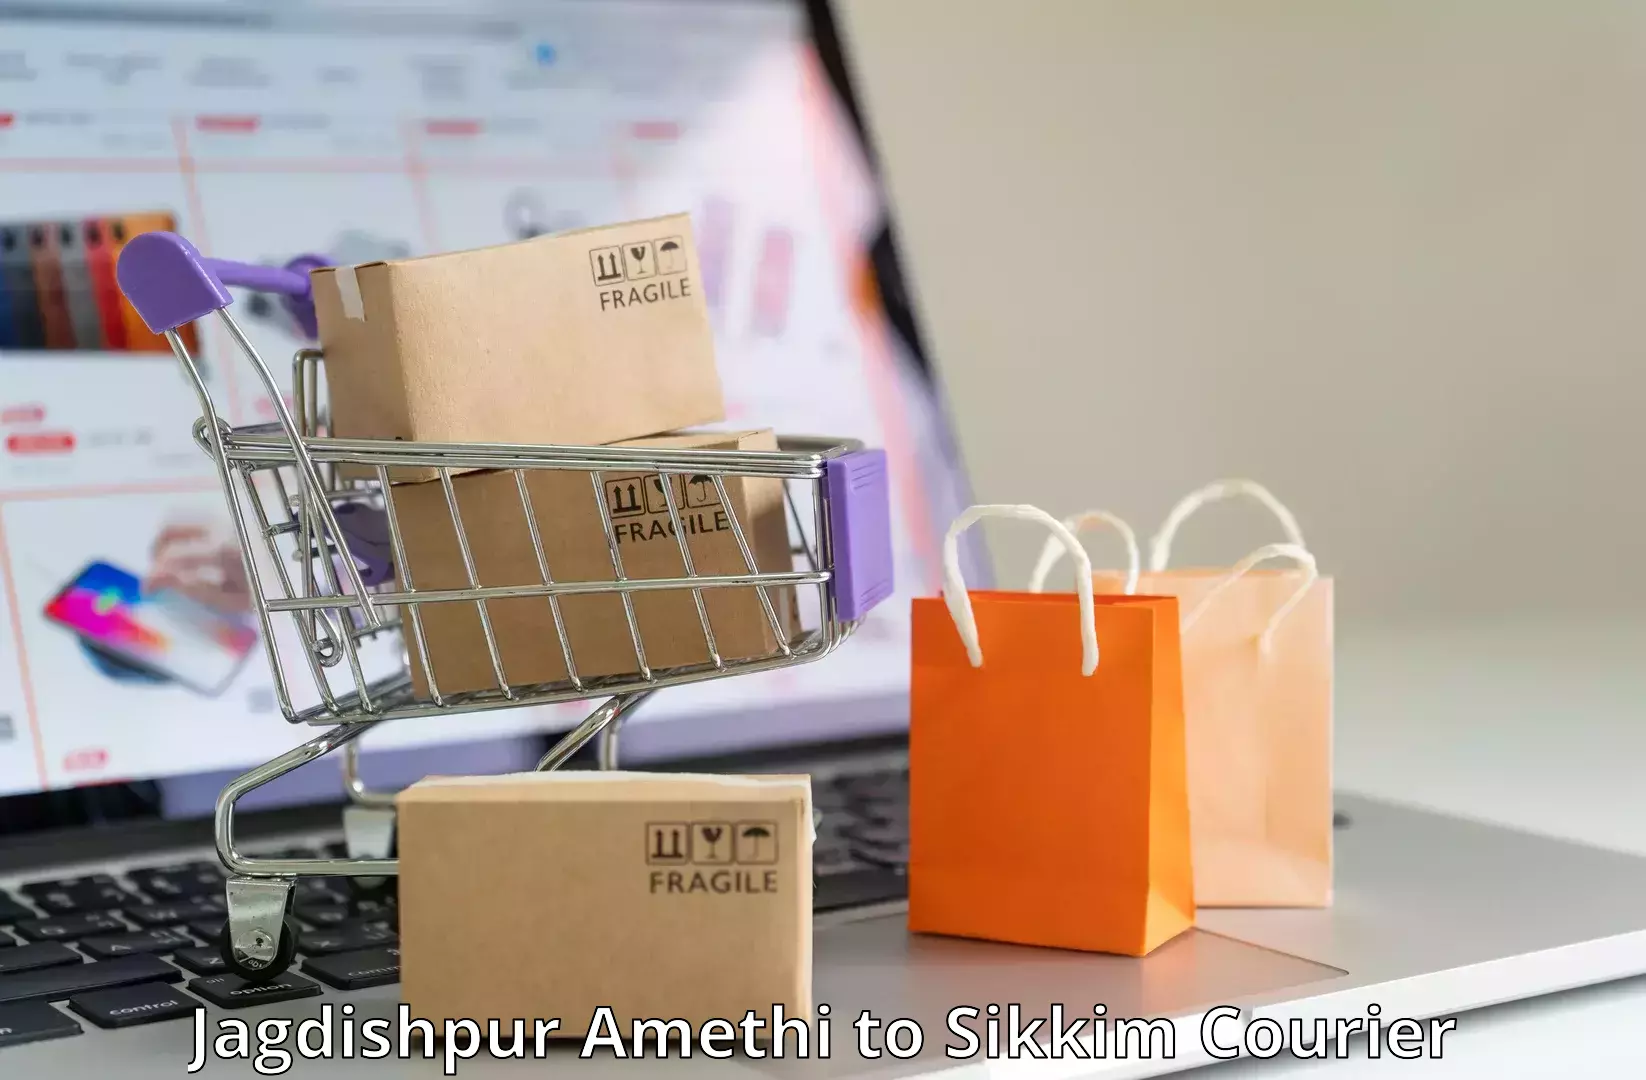 Fast-track shipping solutions in Jagdishpur Amethi to Gangtok